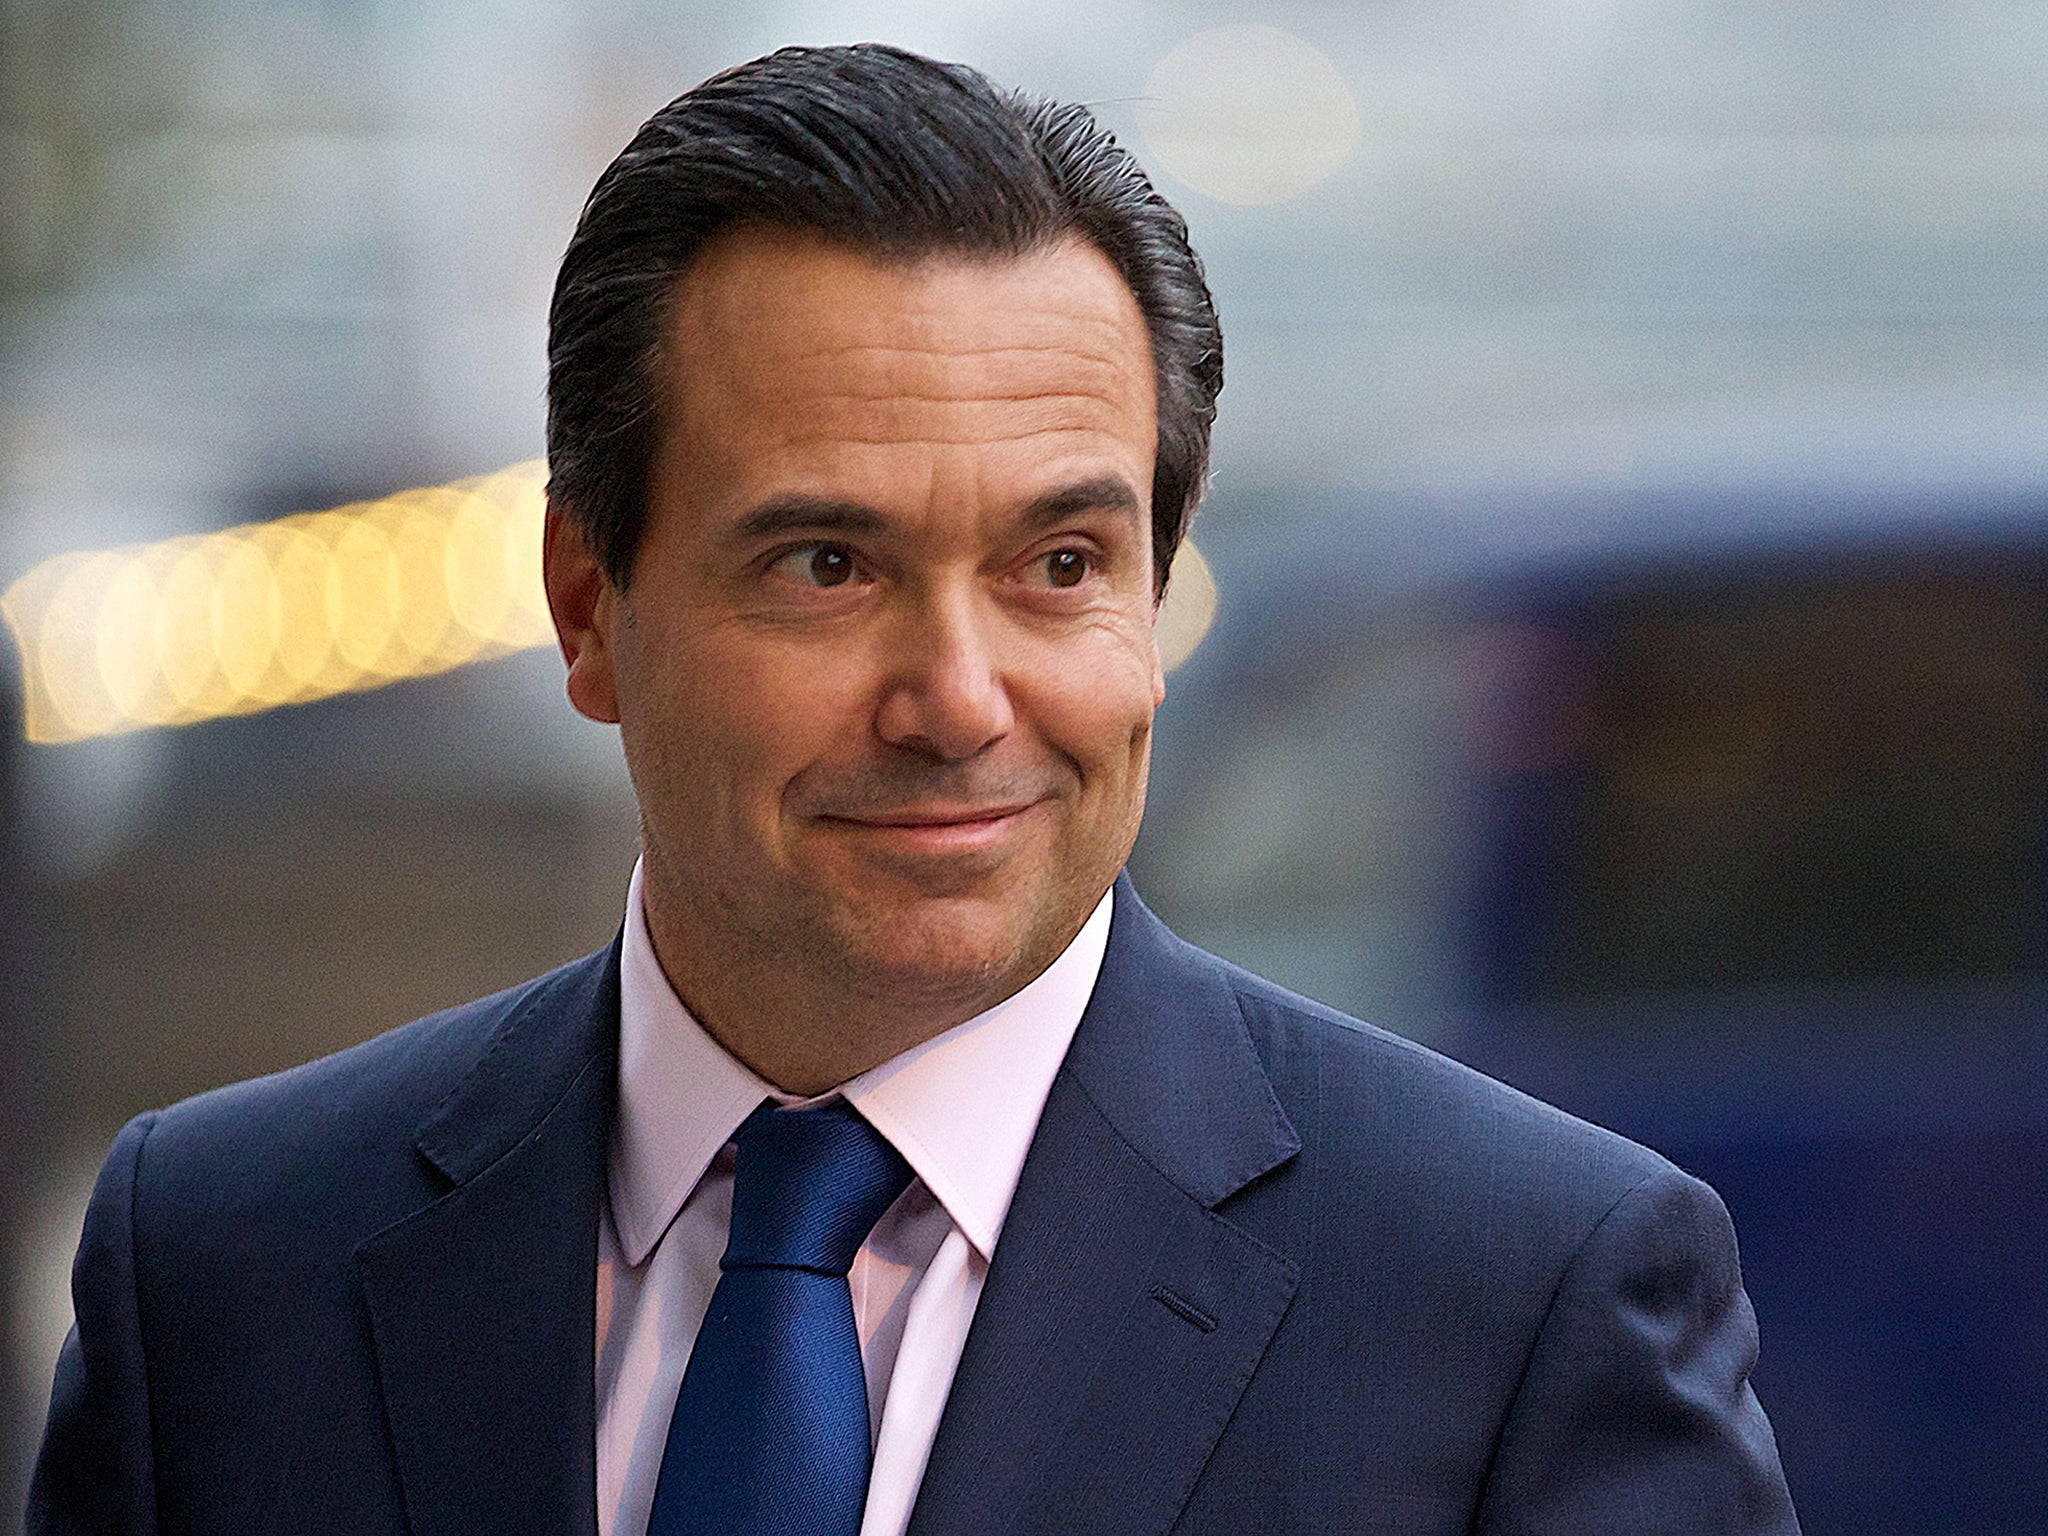 Antonio Horta-Osorio, the Lloyds chief executive, had been seen as performing well